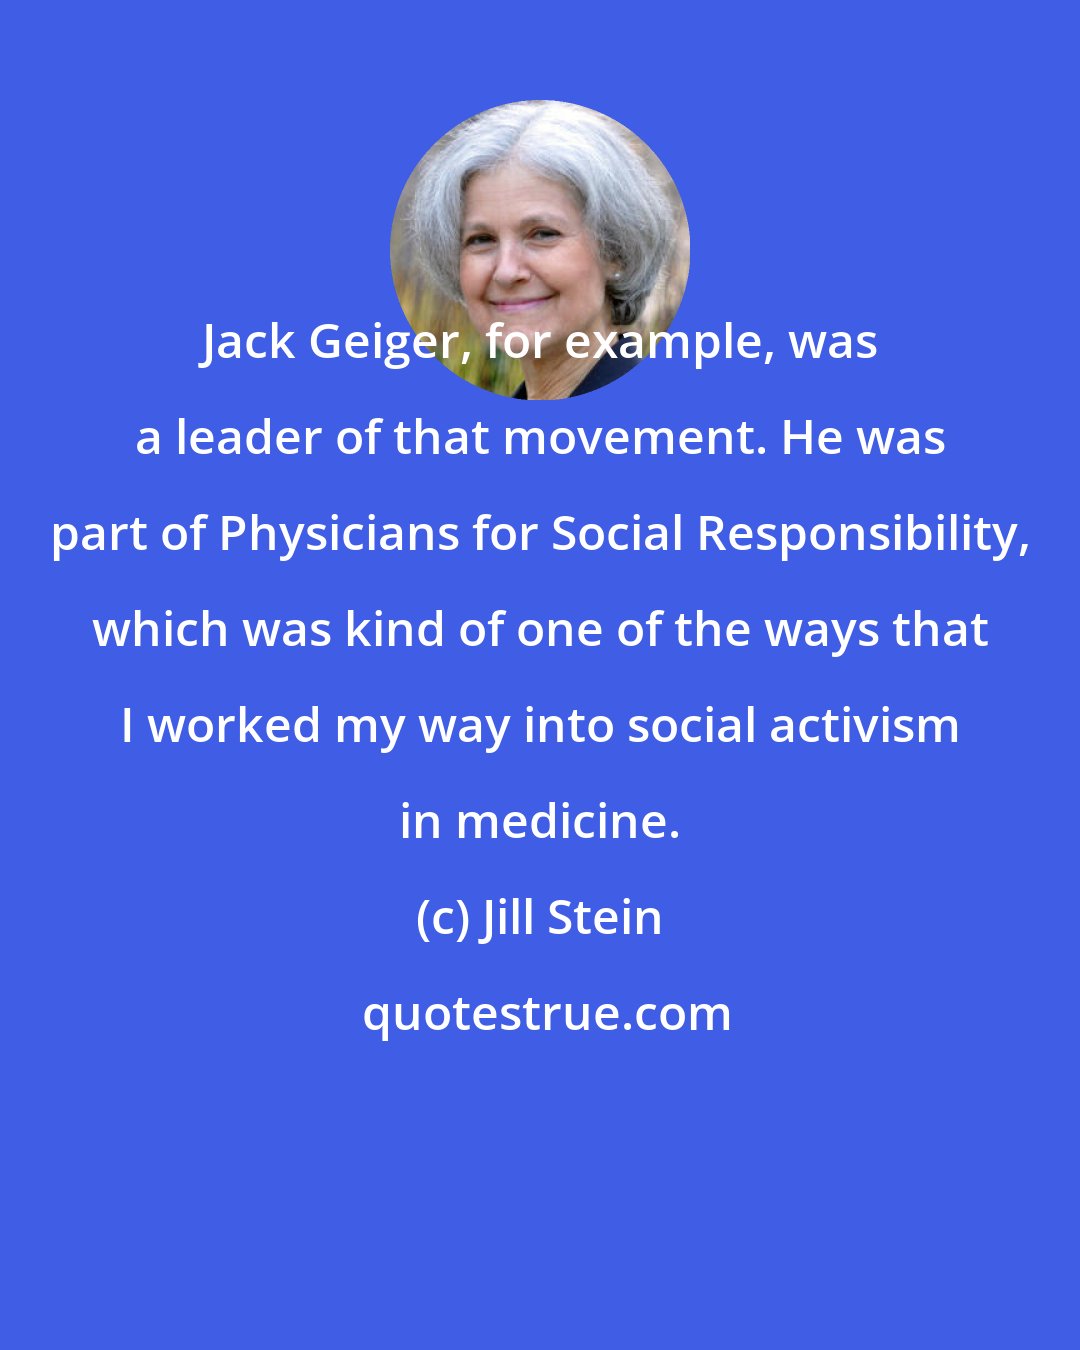 Jill Stein: Jack Geiger, for example, was a leader of that movement. He was part of Physicians for Social Responsibility, which was kind of one of the ways that I worked my way into social activism in medicine.